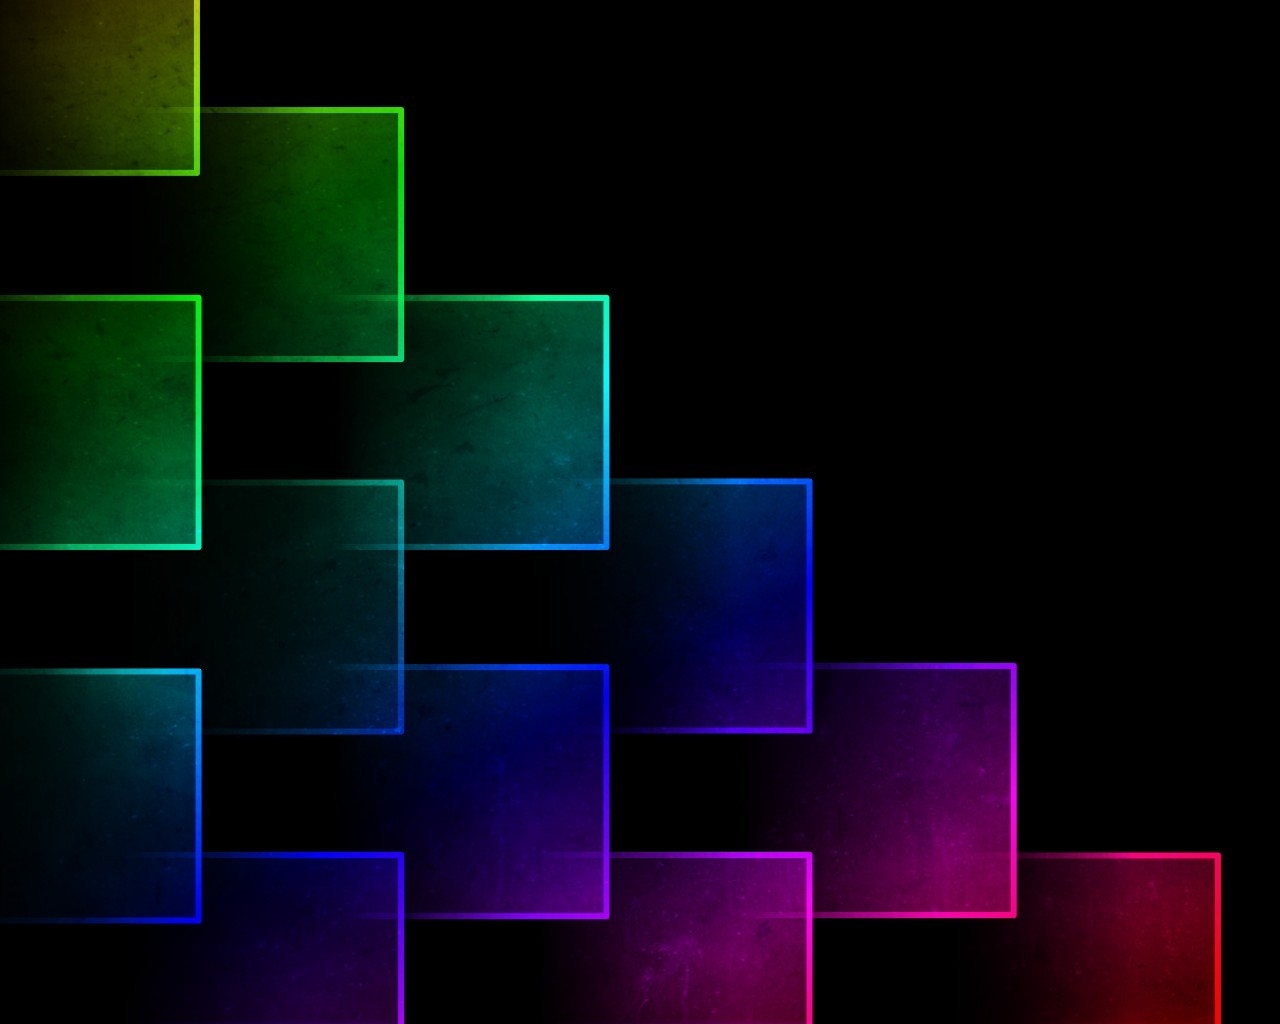 Colorful Cubes for 1280 x 1024 resolution